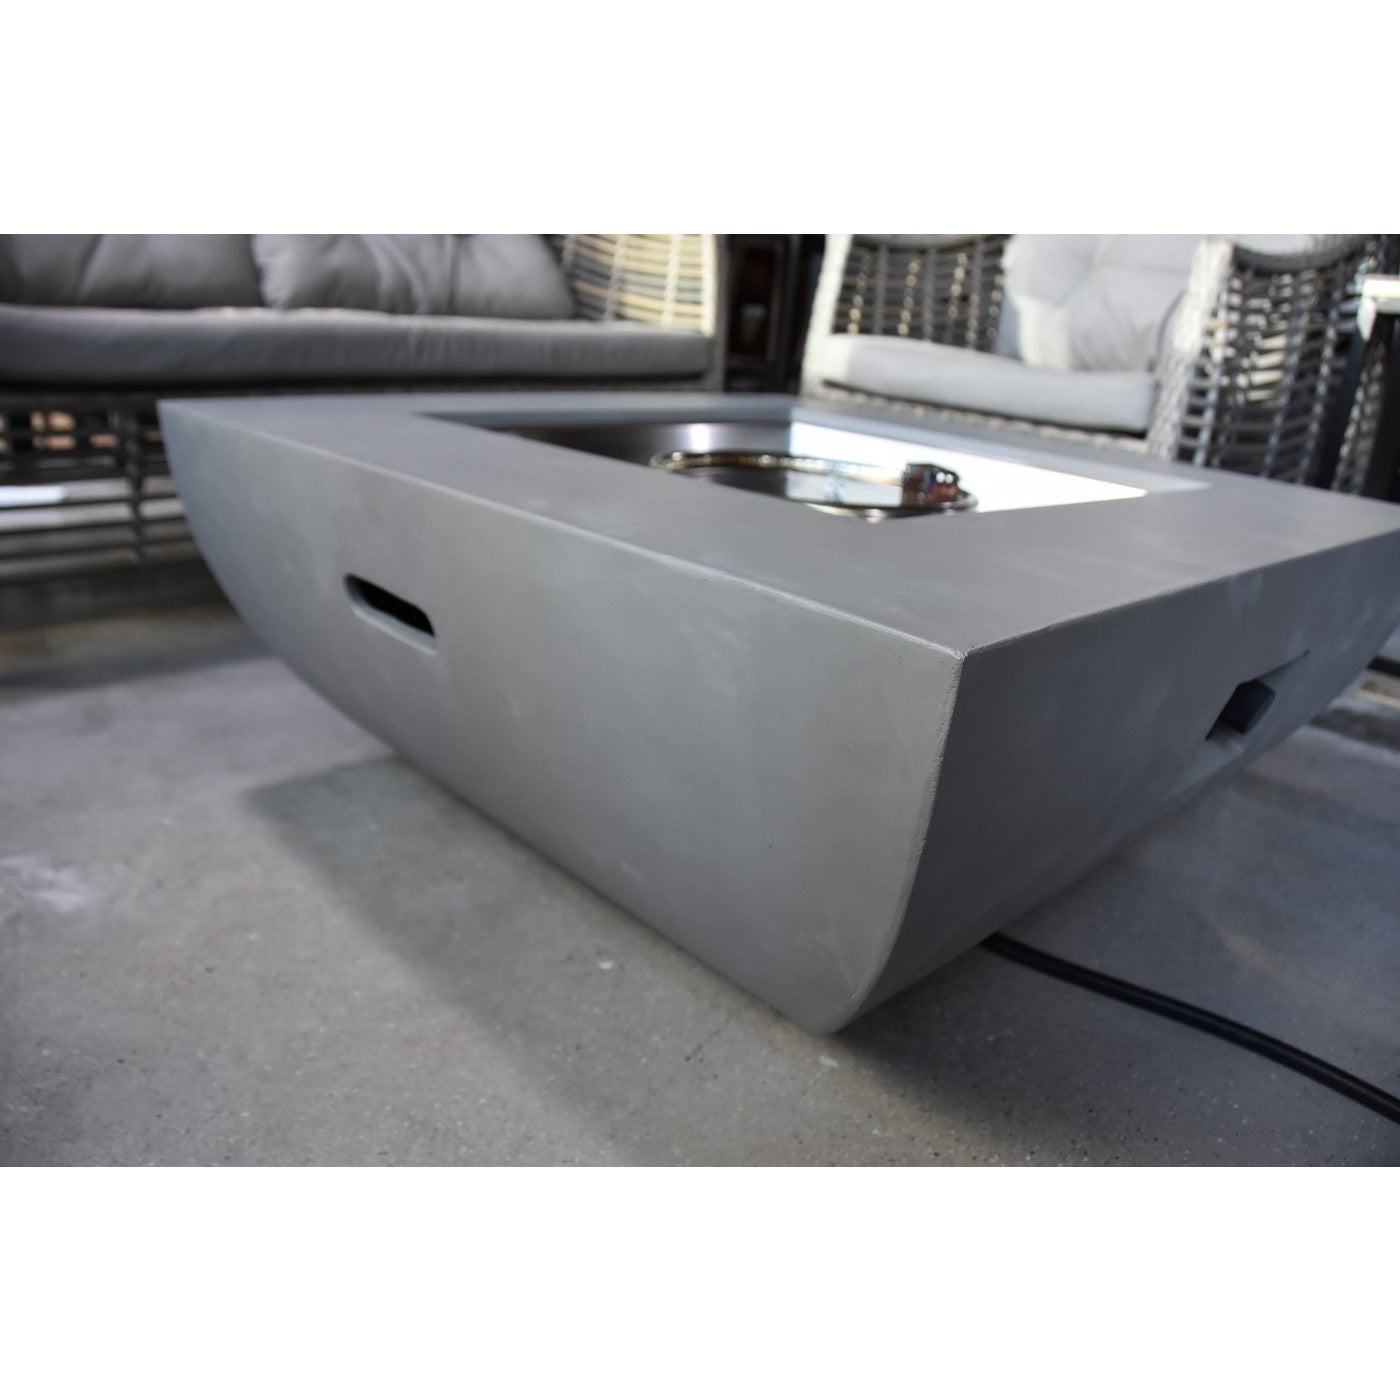 Elementi Westport Fire Pit for Liquid Propane Gas or Natural Gas in Light Grey (Includes PVC Cover) - PadioLiving - Elementi Westport Fire Pit for Liquid Propane Gas or Natural Gas in Light Grey (Includes PVC Cover) - Fire Pit - PadioLiving